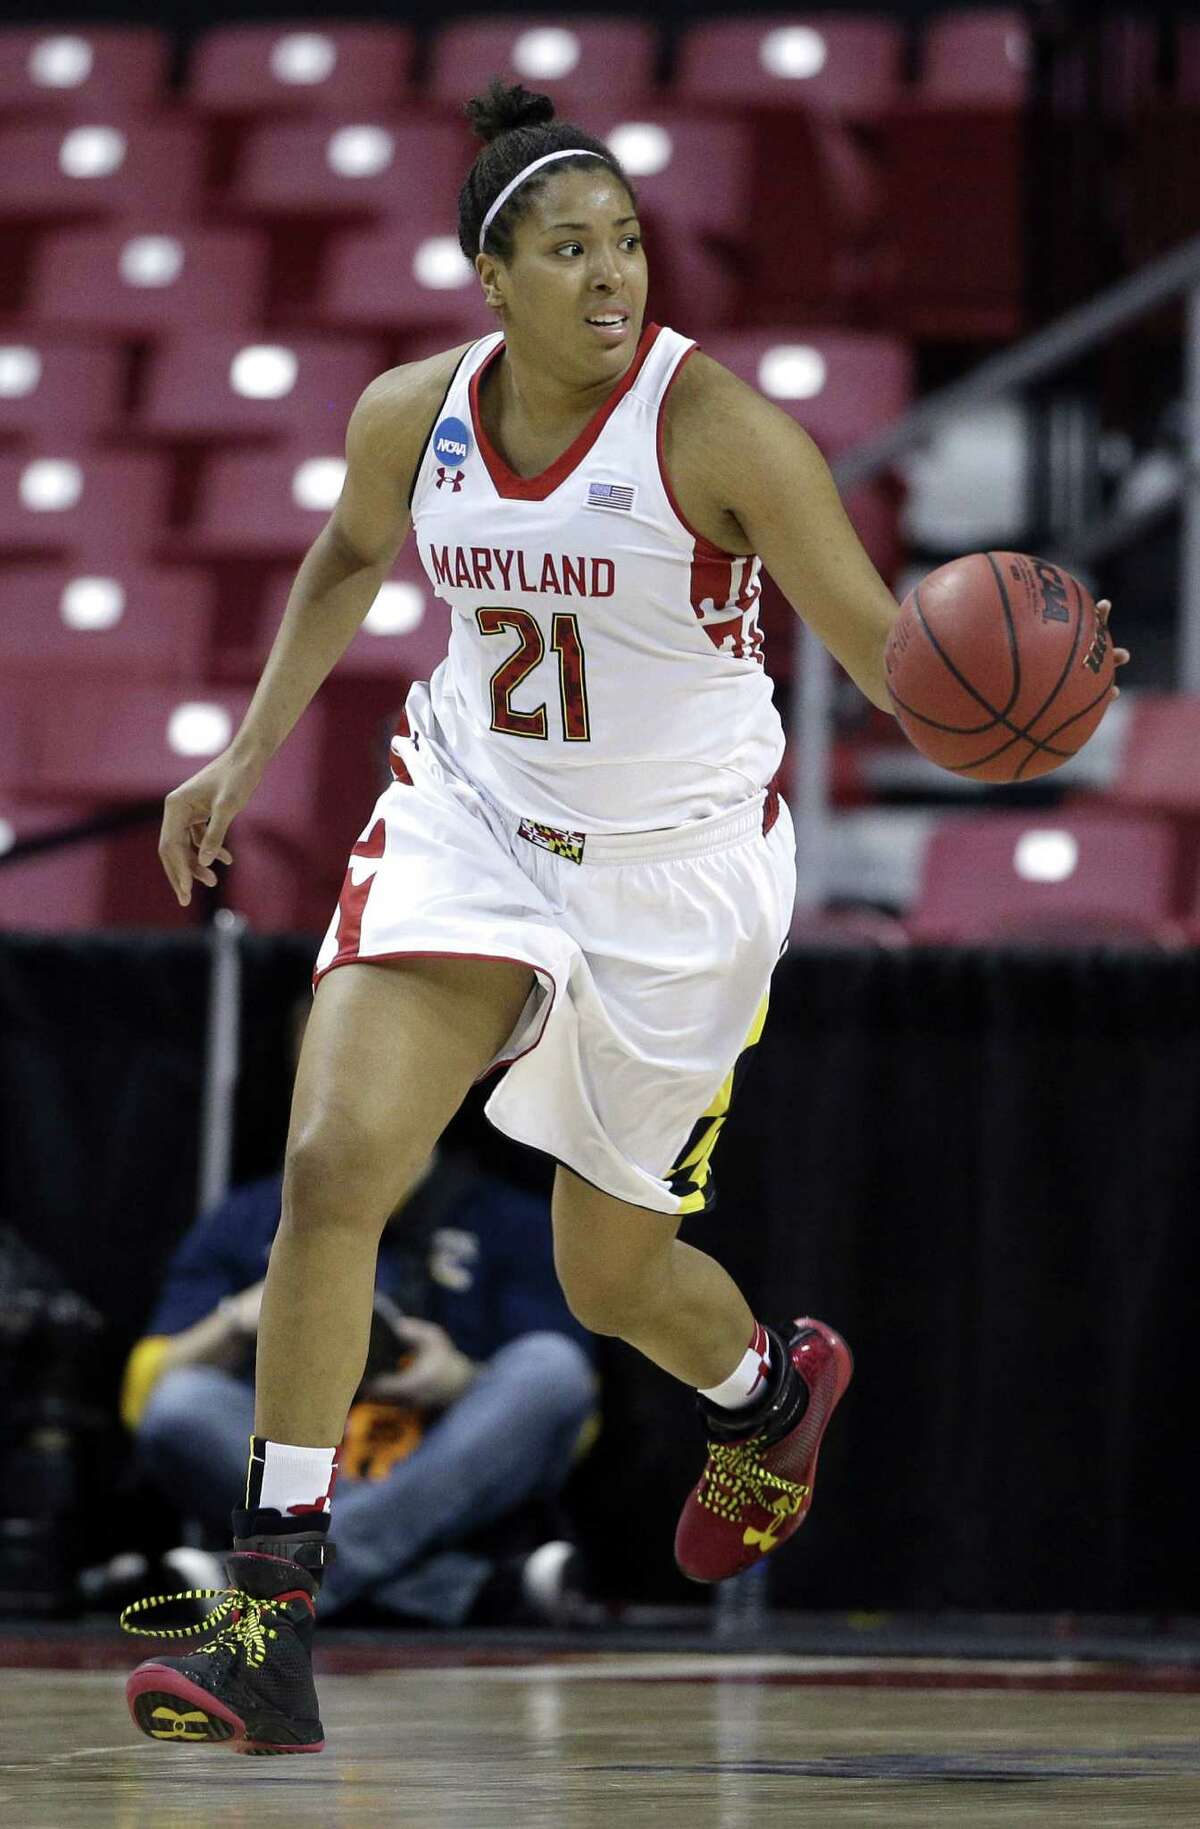 Maryland's Tianna Hawkins could be an option if the Silver Stars go for size.